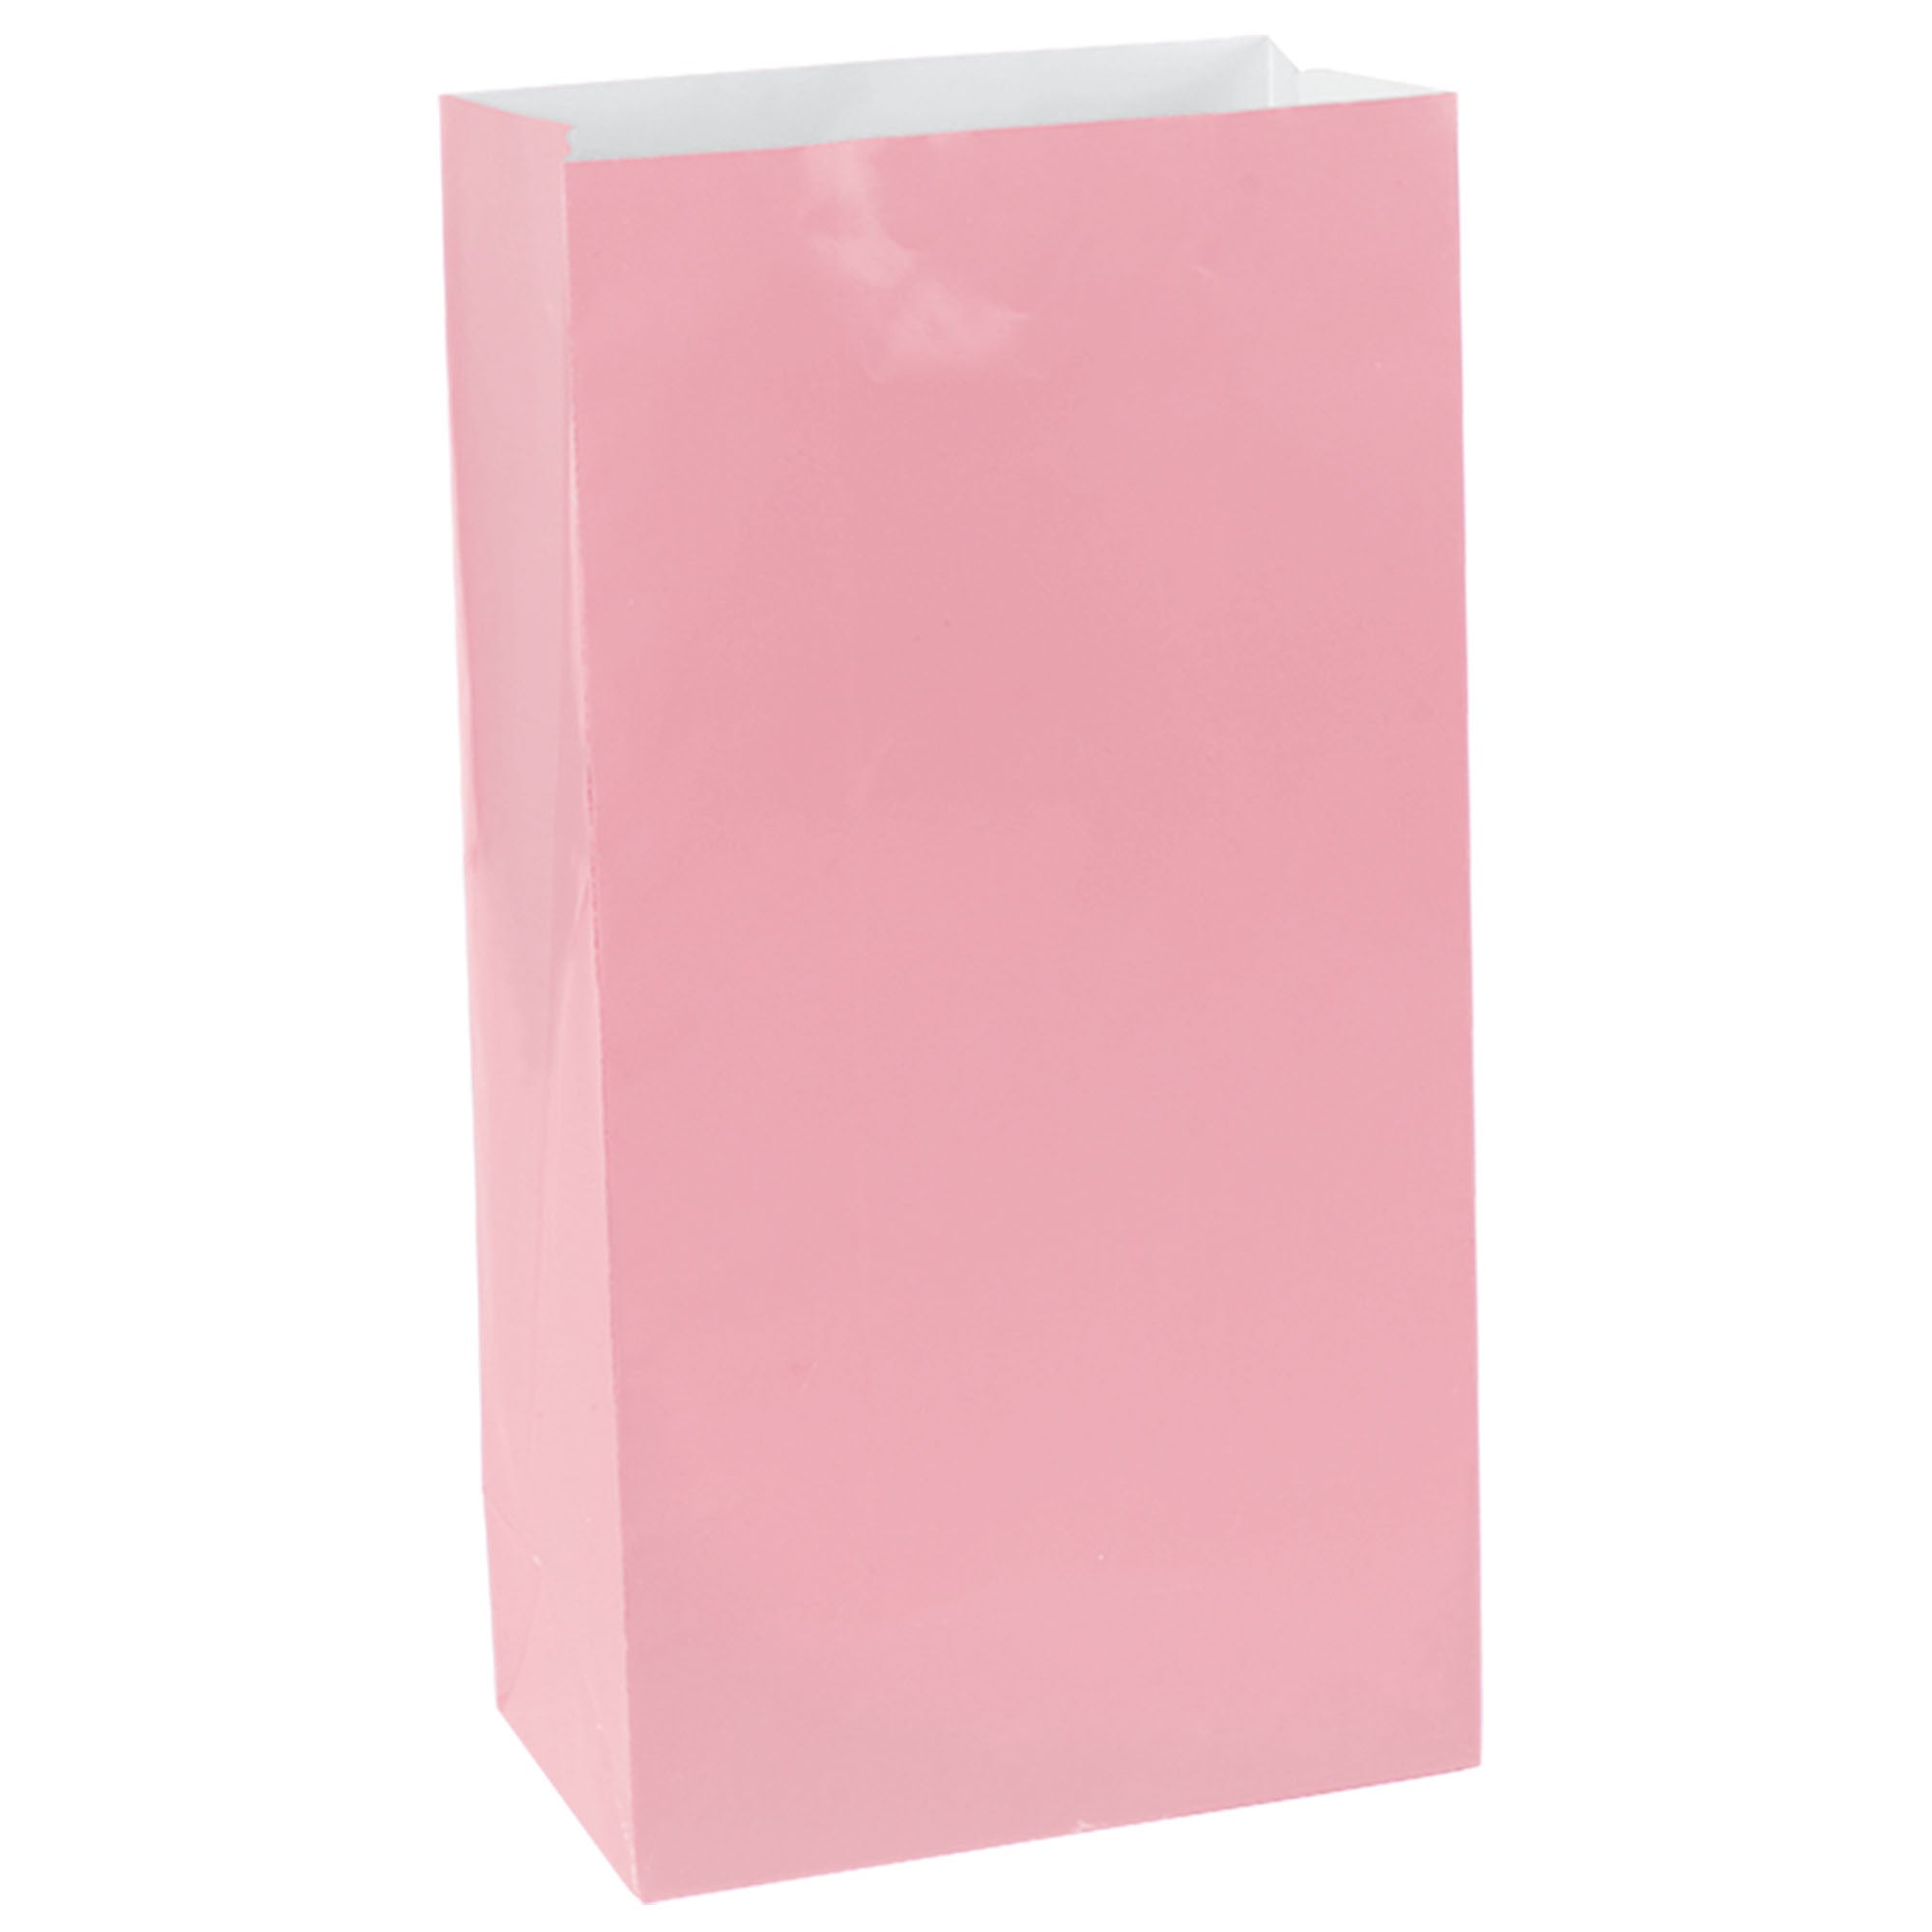 12 Mini Packaged Paper Bags  New Pink  6.5x3x2in